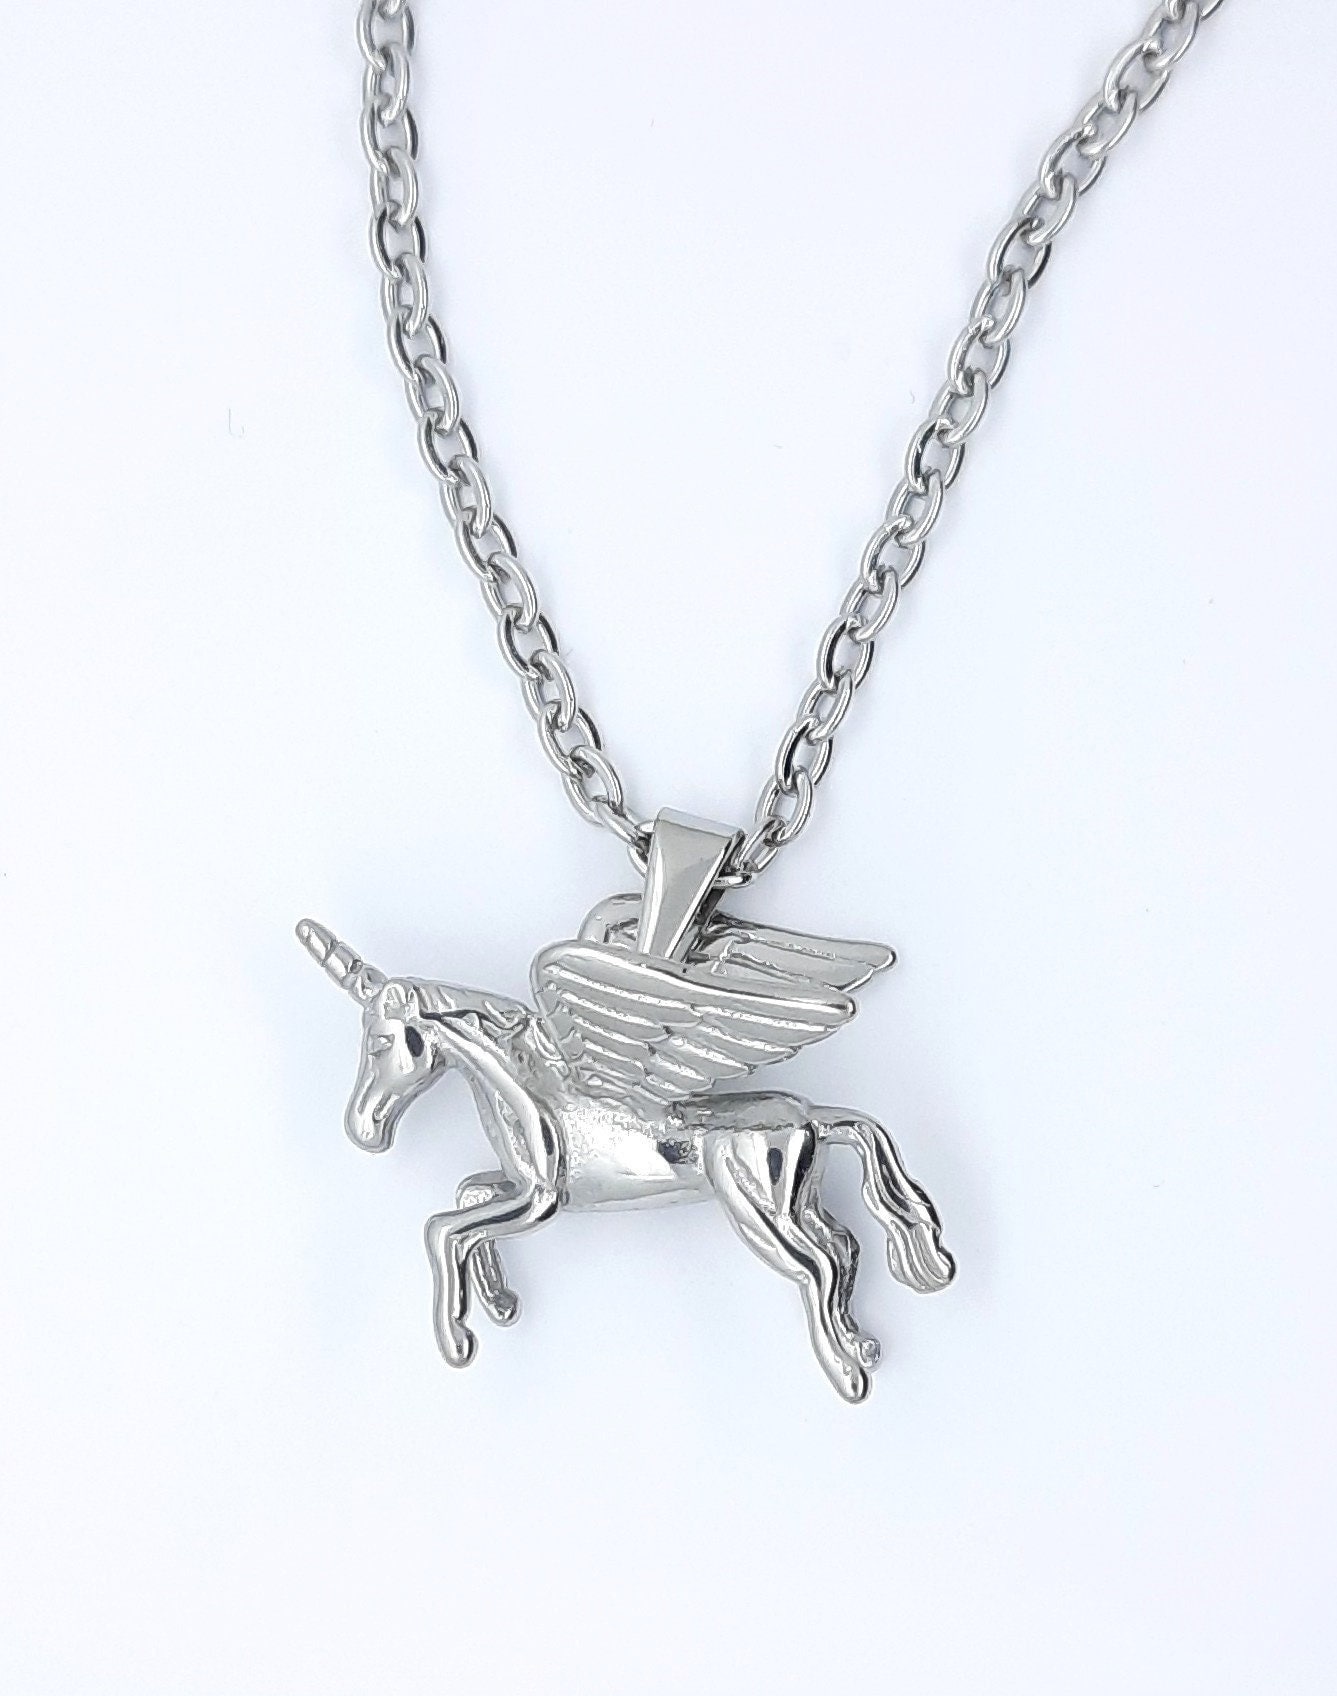 Unicorn Pendant Necklace Gift for Girls Teens Sterling Silver Fairytale  Unicorn Jewelry New Year Birthday Gift for Women | Unicorn necklace, Unicorn  jewelry, Unicorn pendant